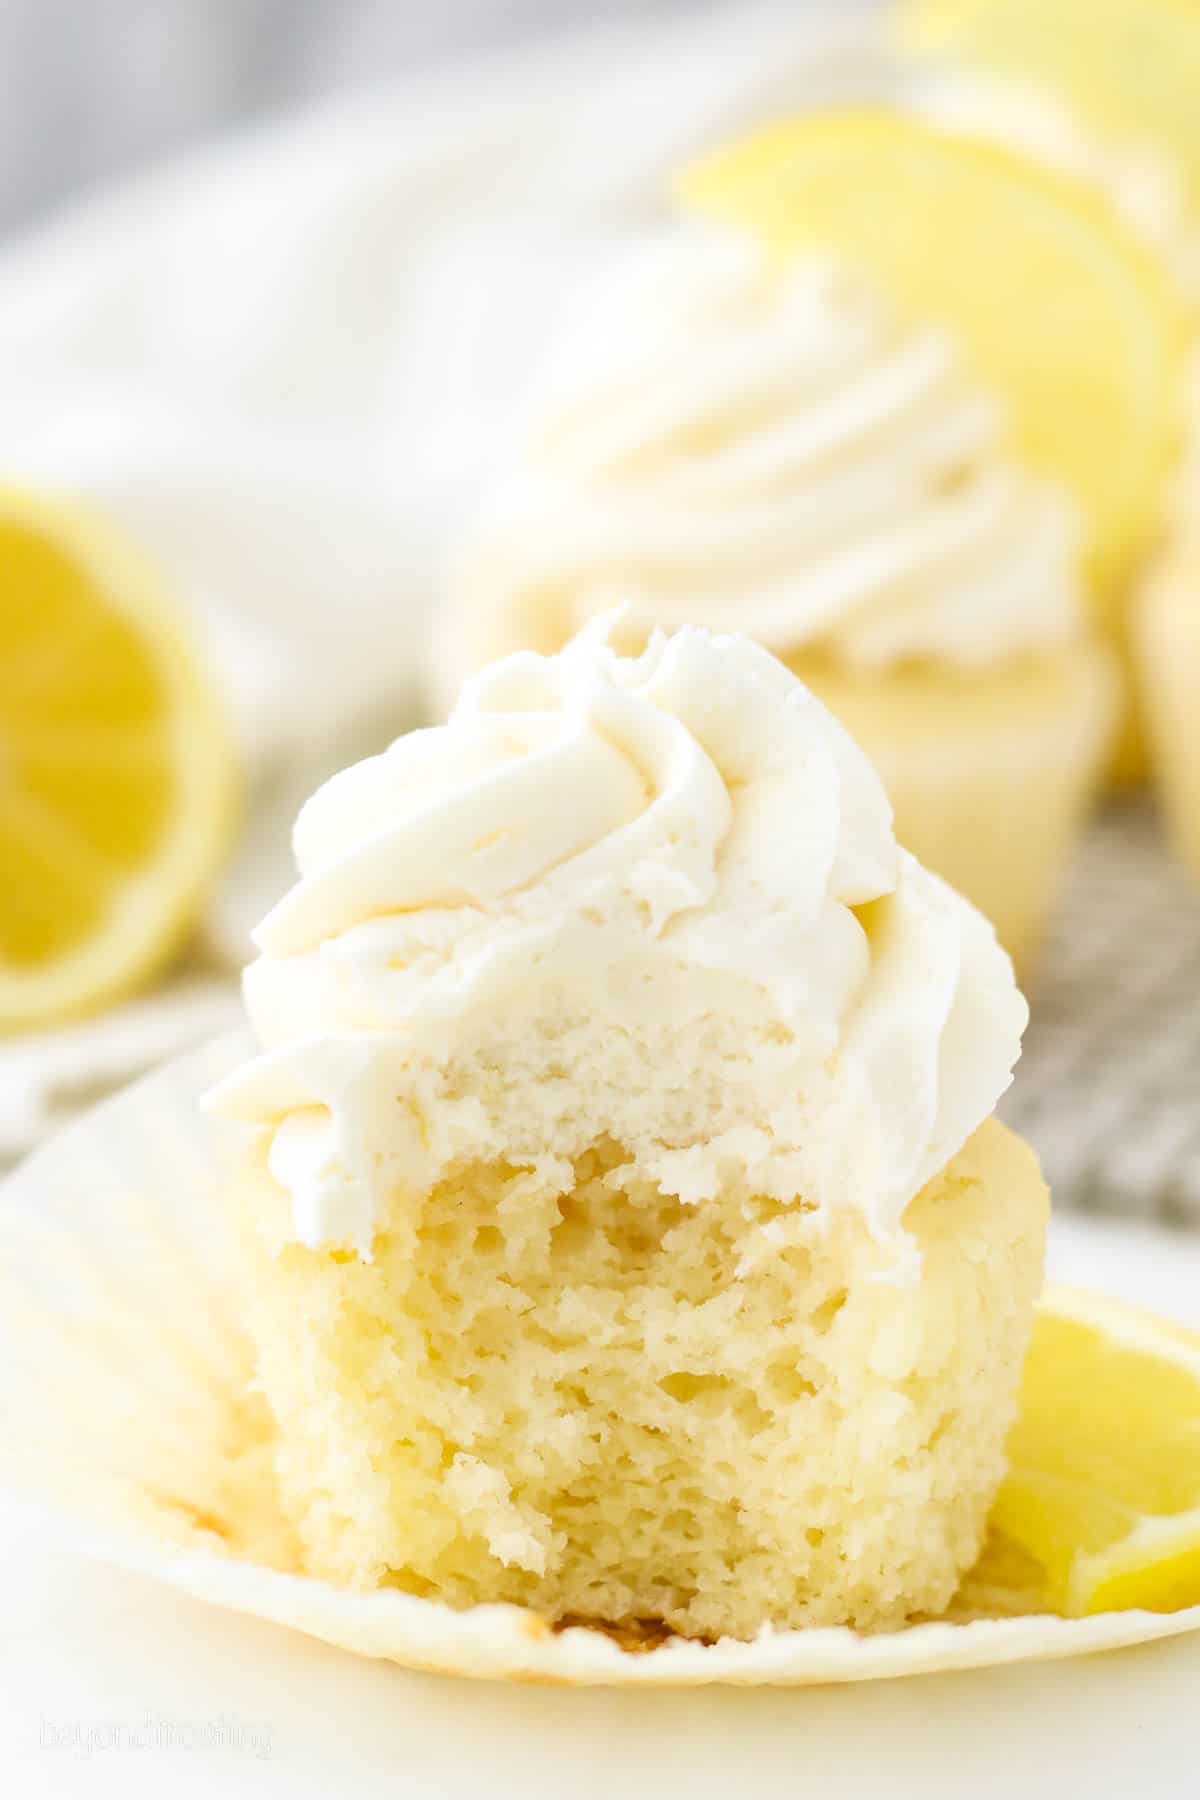 An unwrapped frosted lemon cupcake with a bite missing.